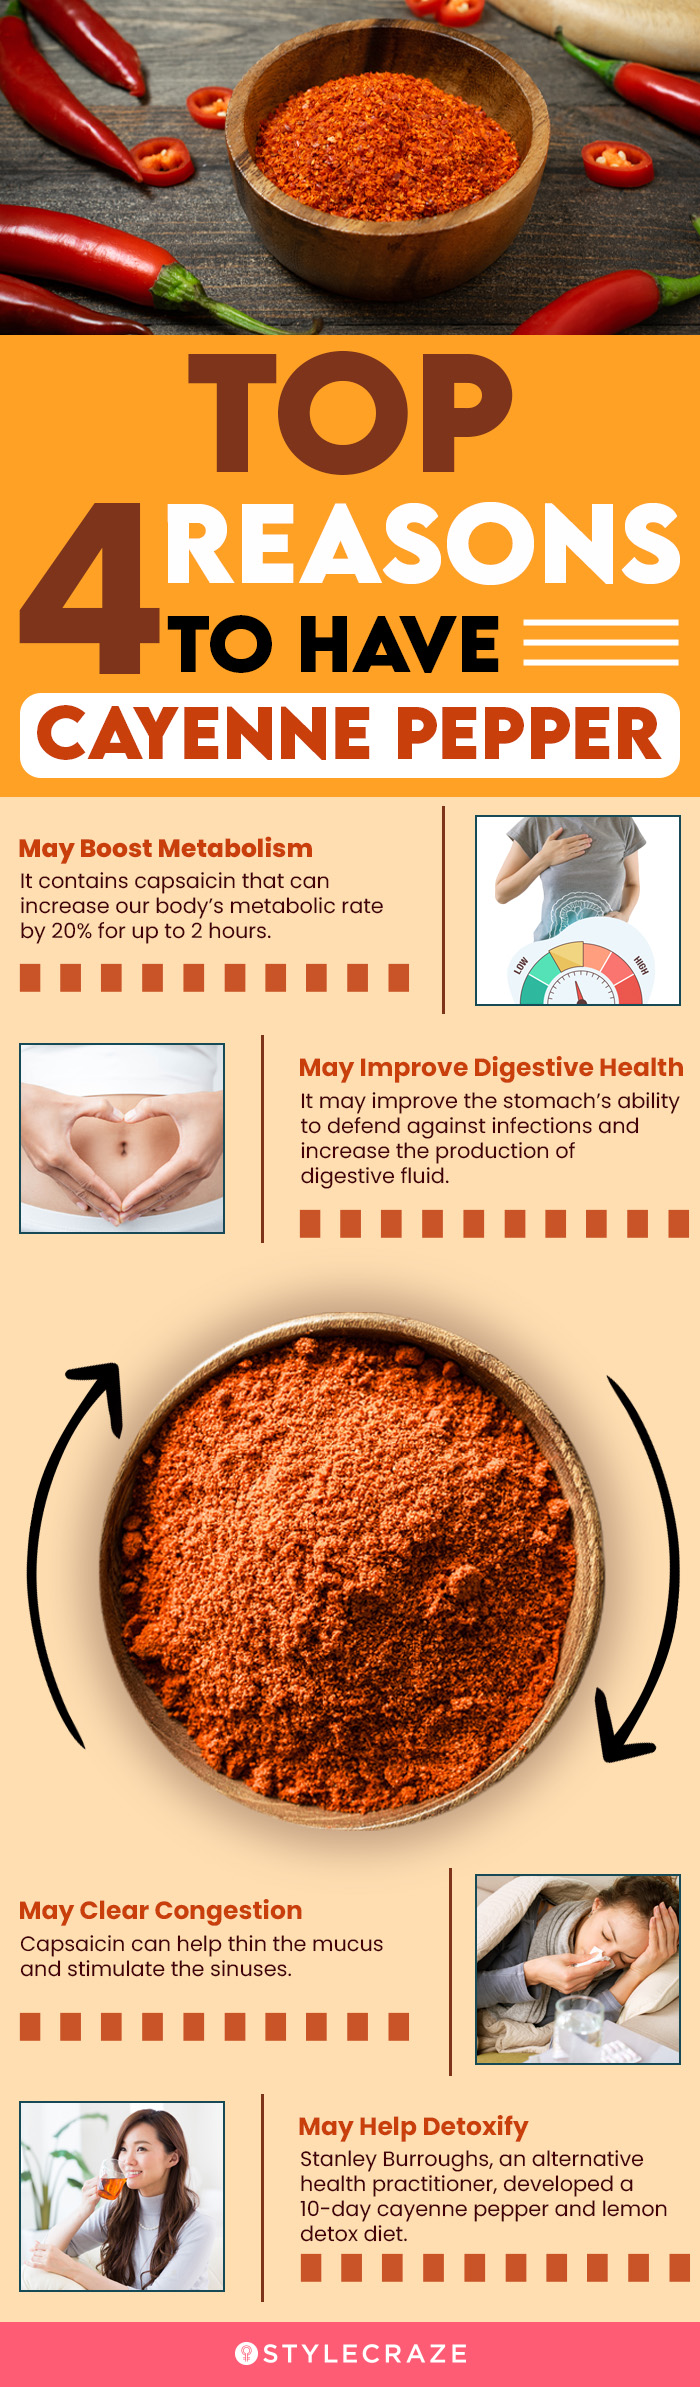 top 4 reasons to have cayenne pepper [infographic]